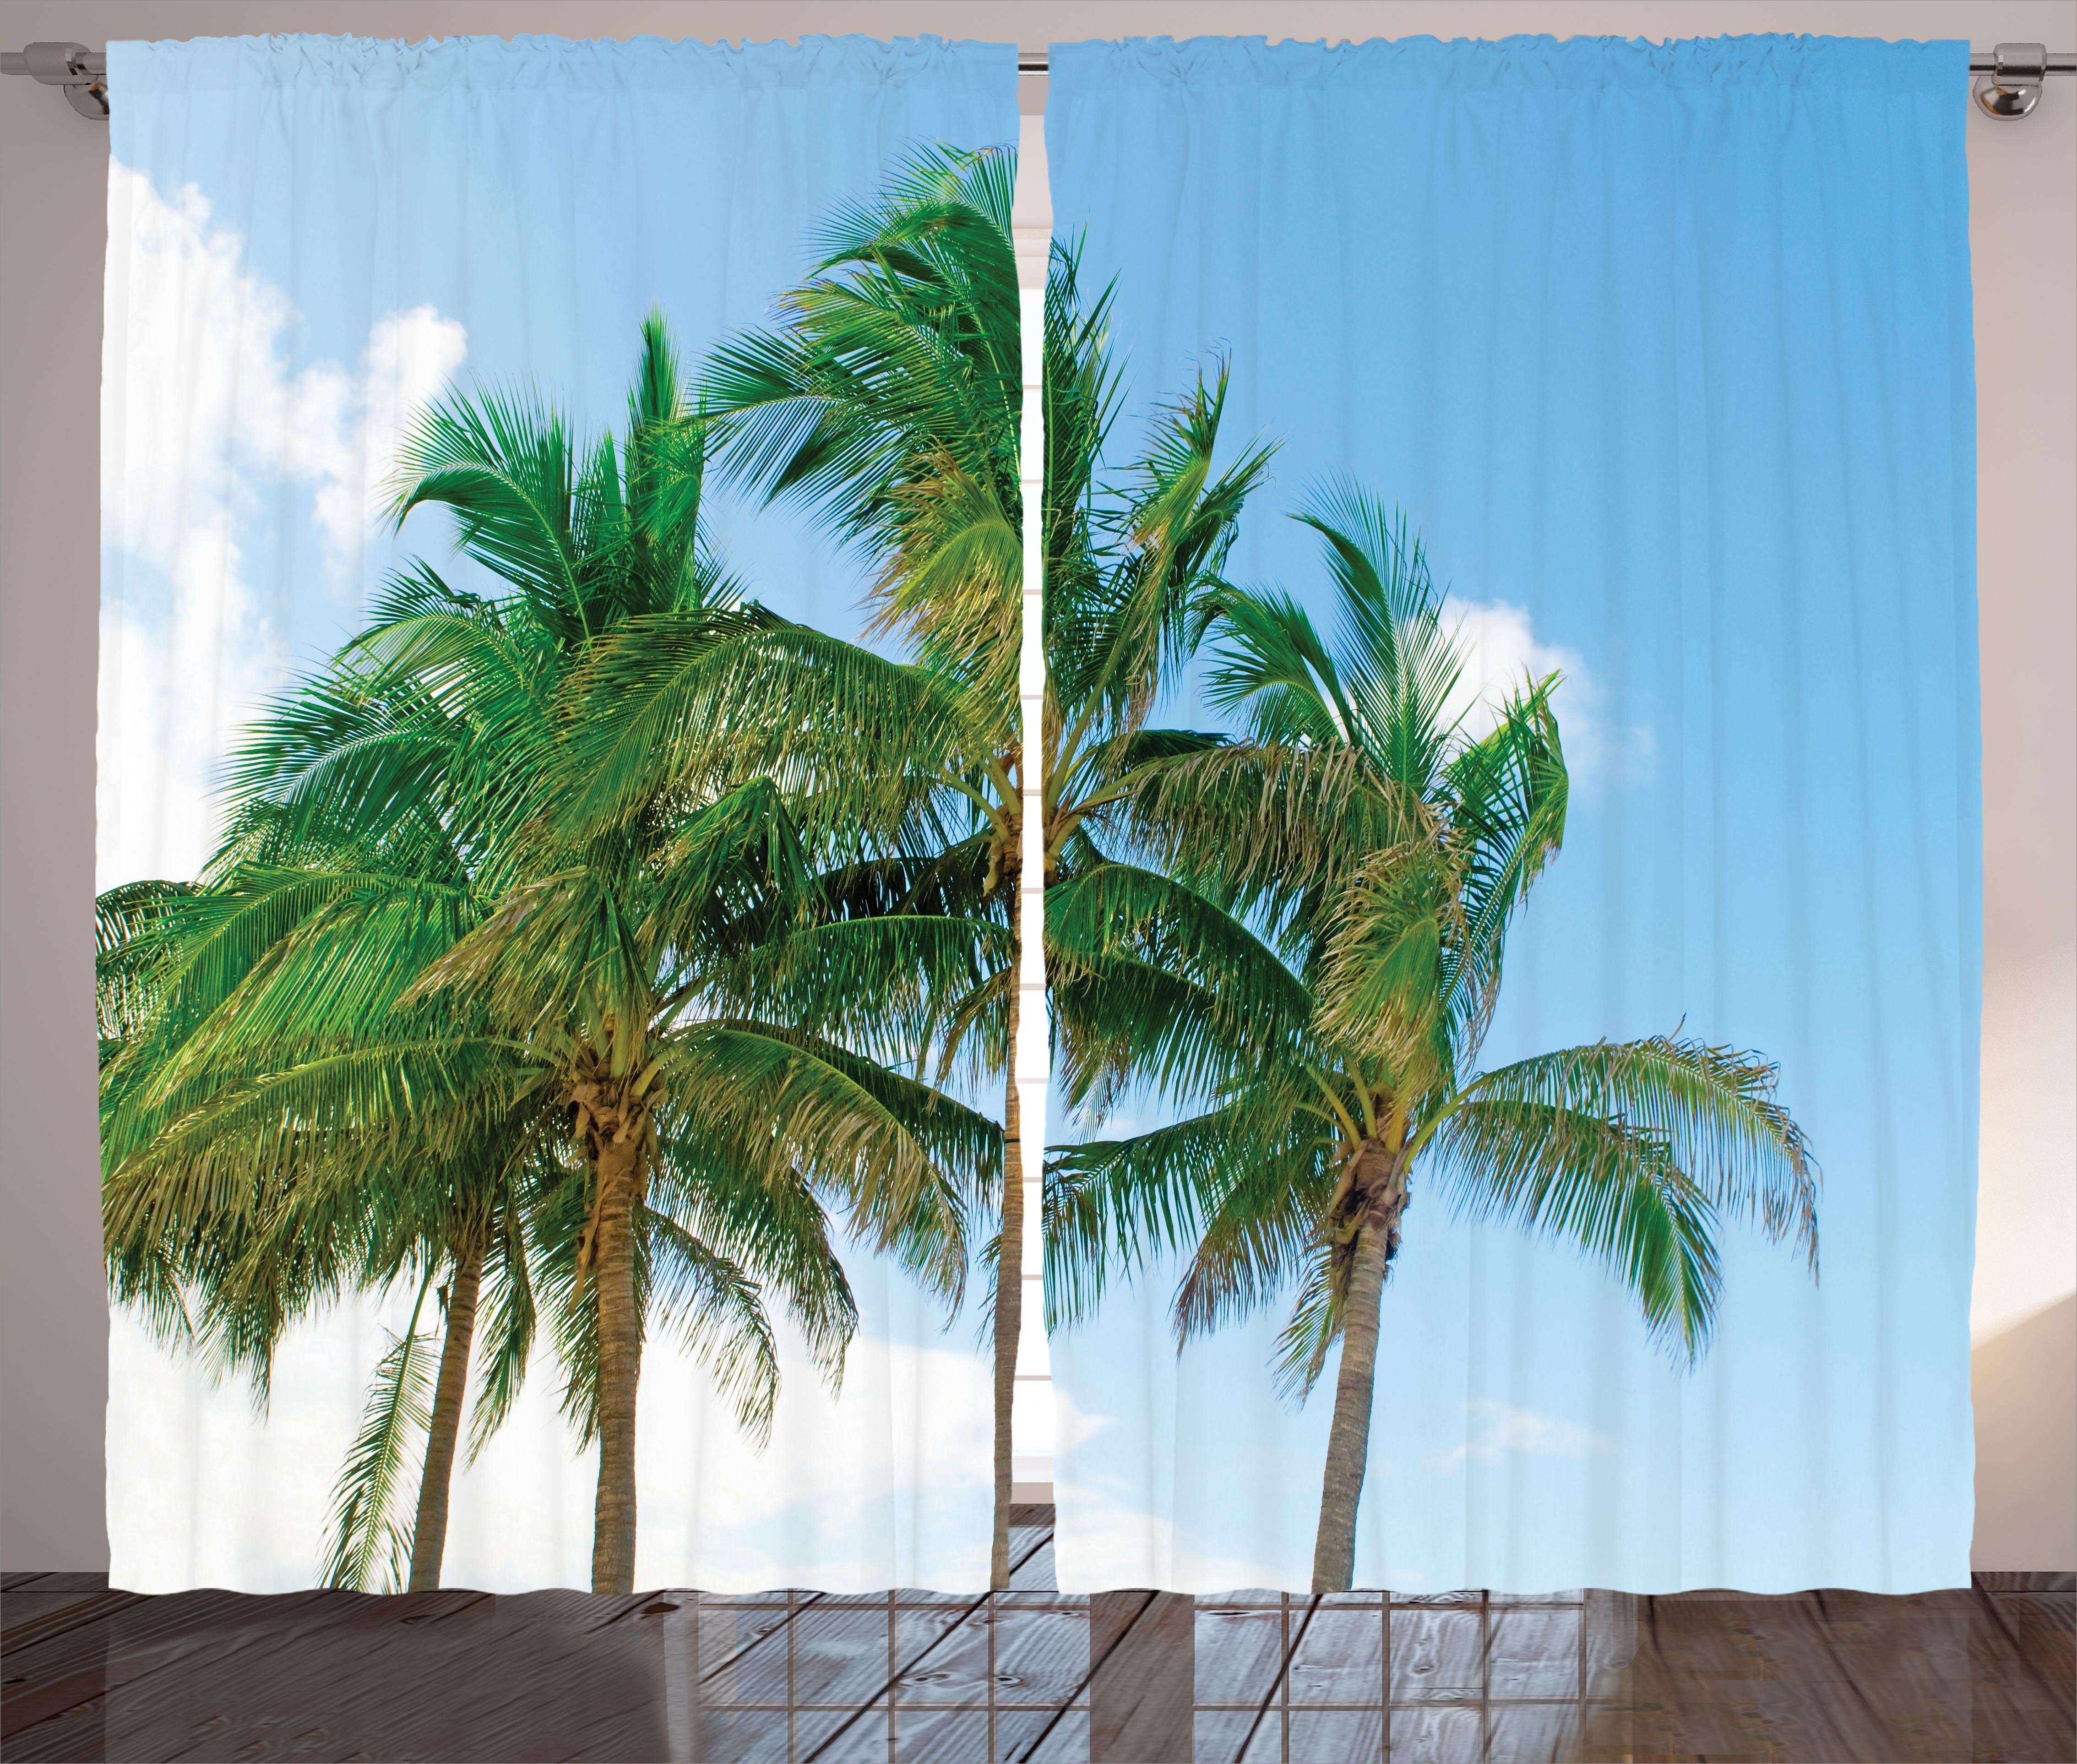 3d photo printing photo curtain to go Photo Curtain "Palm Tree" Curtain with Motif